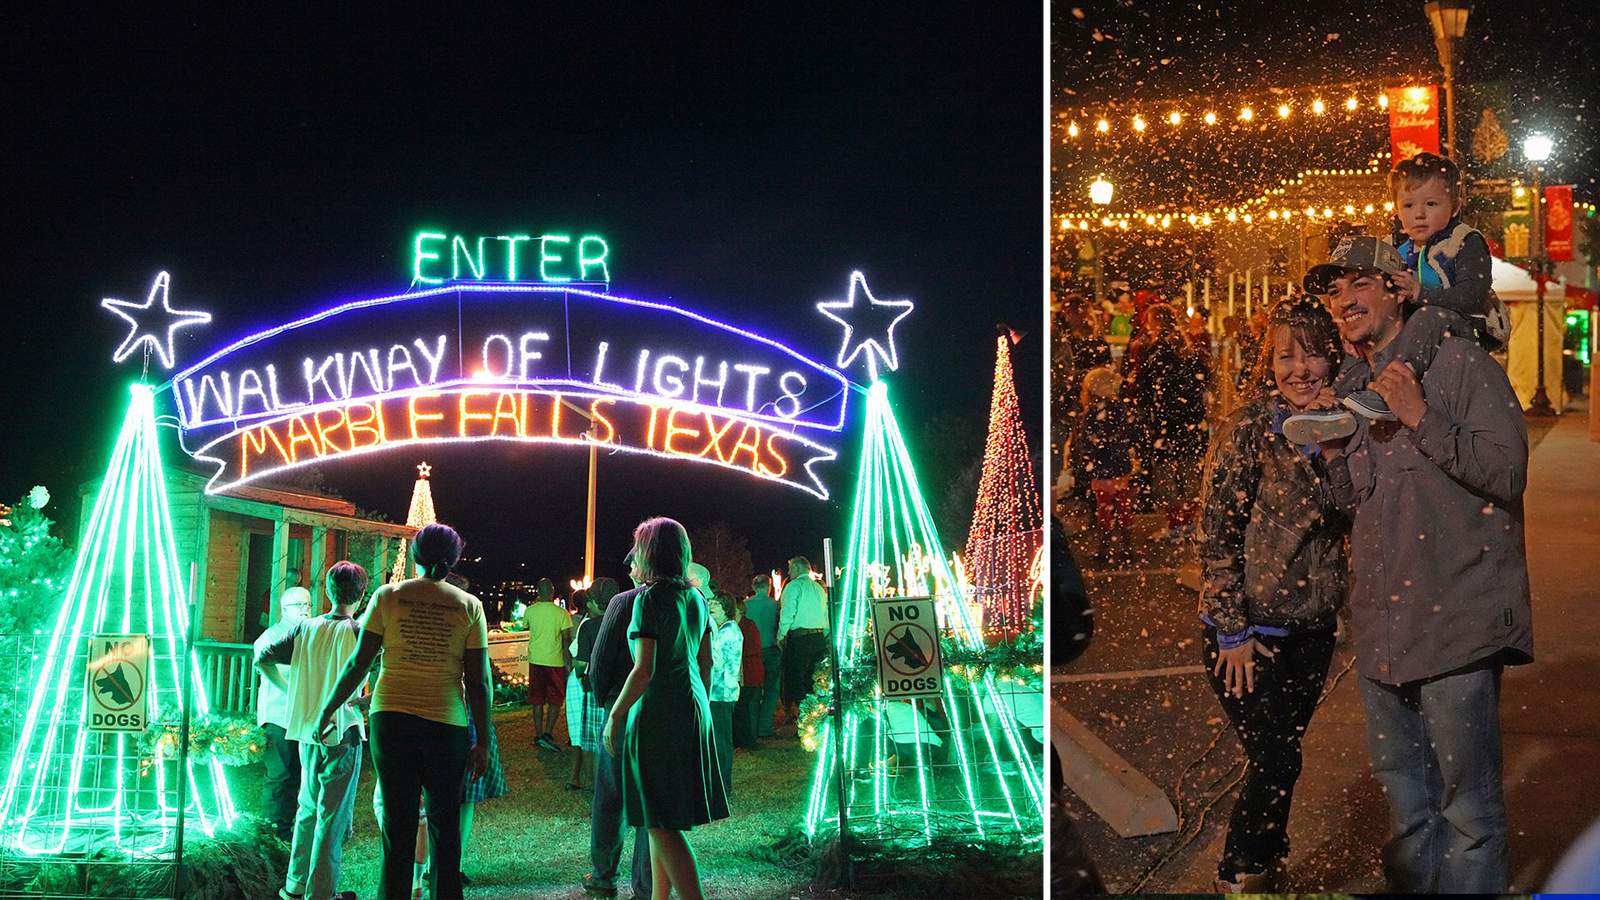 Free 44-day celebration lets you walk through 2 million holiday lights in Marble Falls